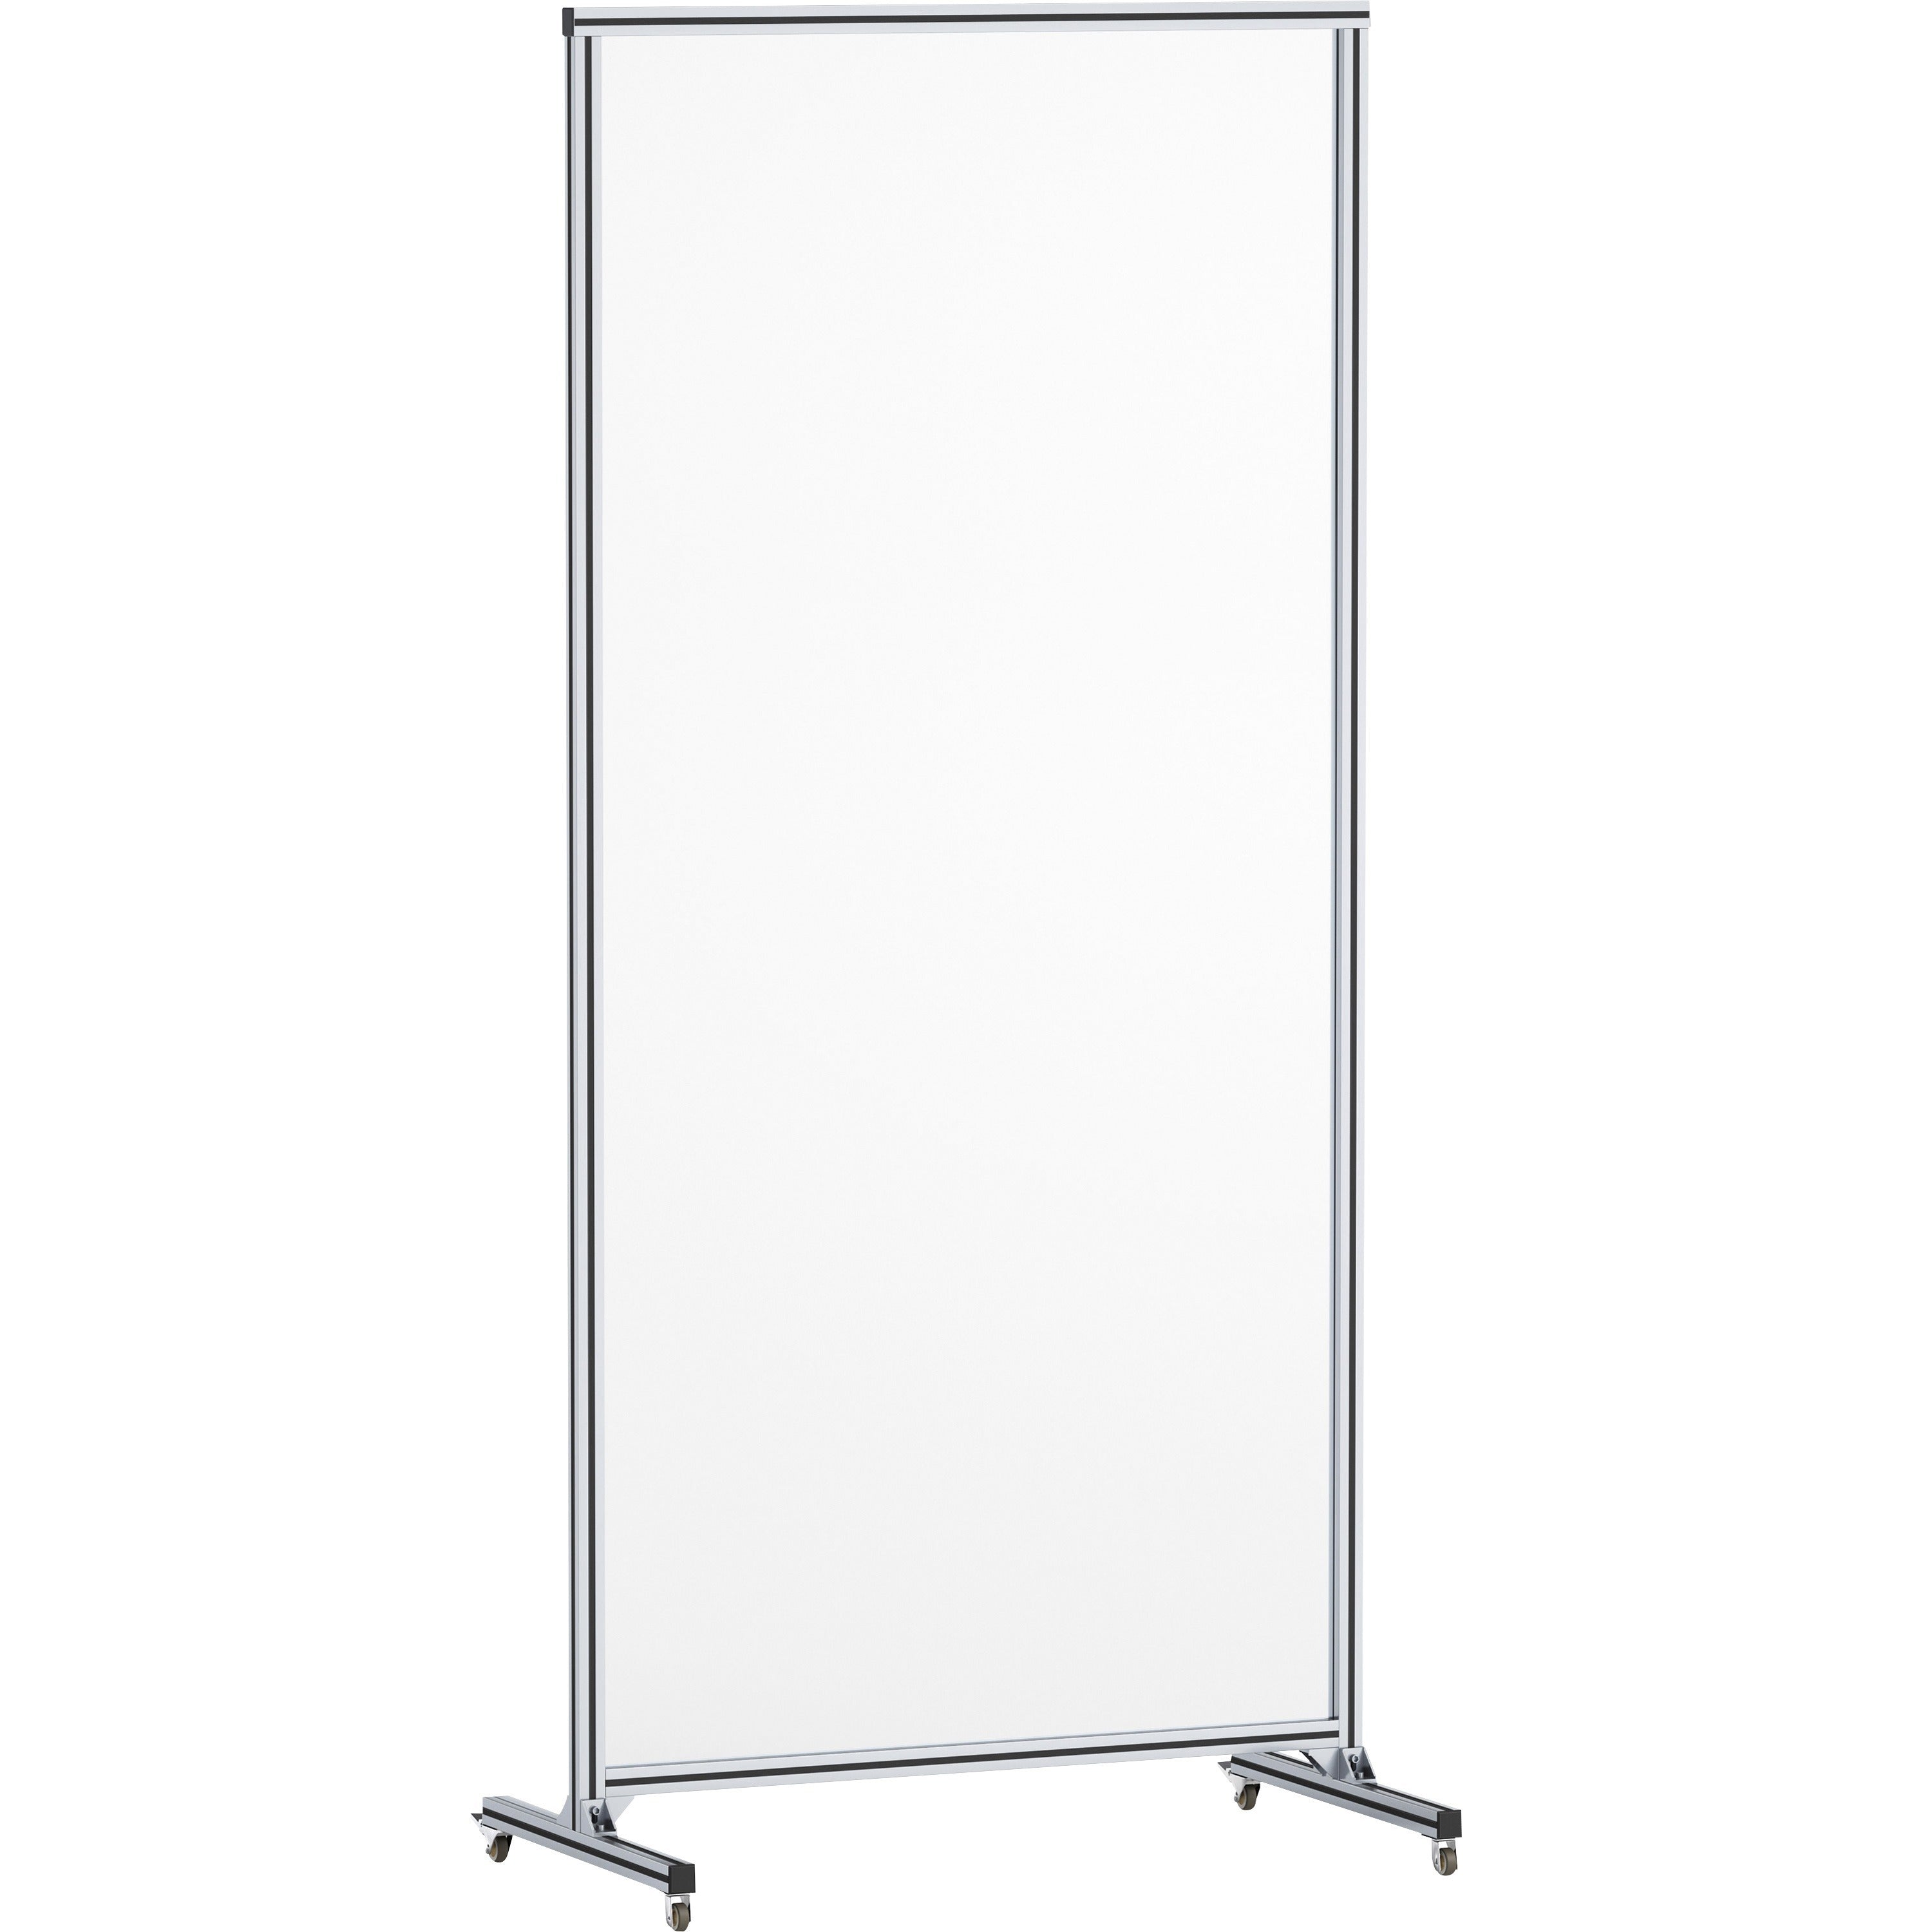 lorell-mobile-full-protective-glass-screen-36-width-x-03-depth-x-78-height-1-each-clear-tempered-glass-aluminum_llr55673 - 5